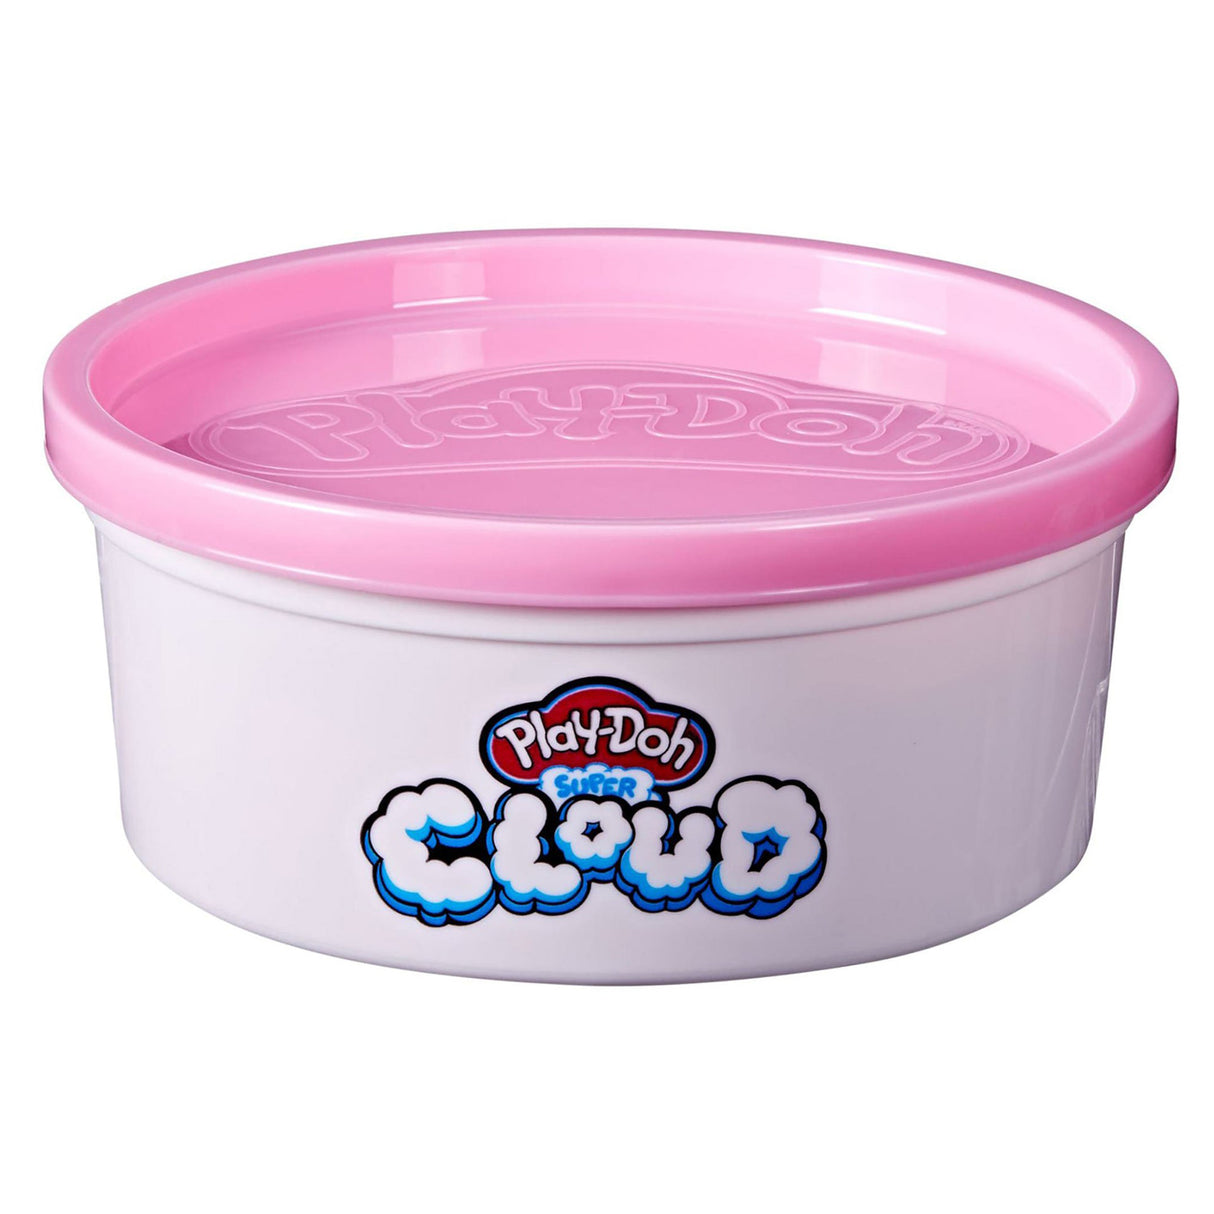 Play-Doh Super Cloud Slime Single Can, Pink